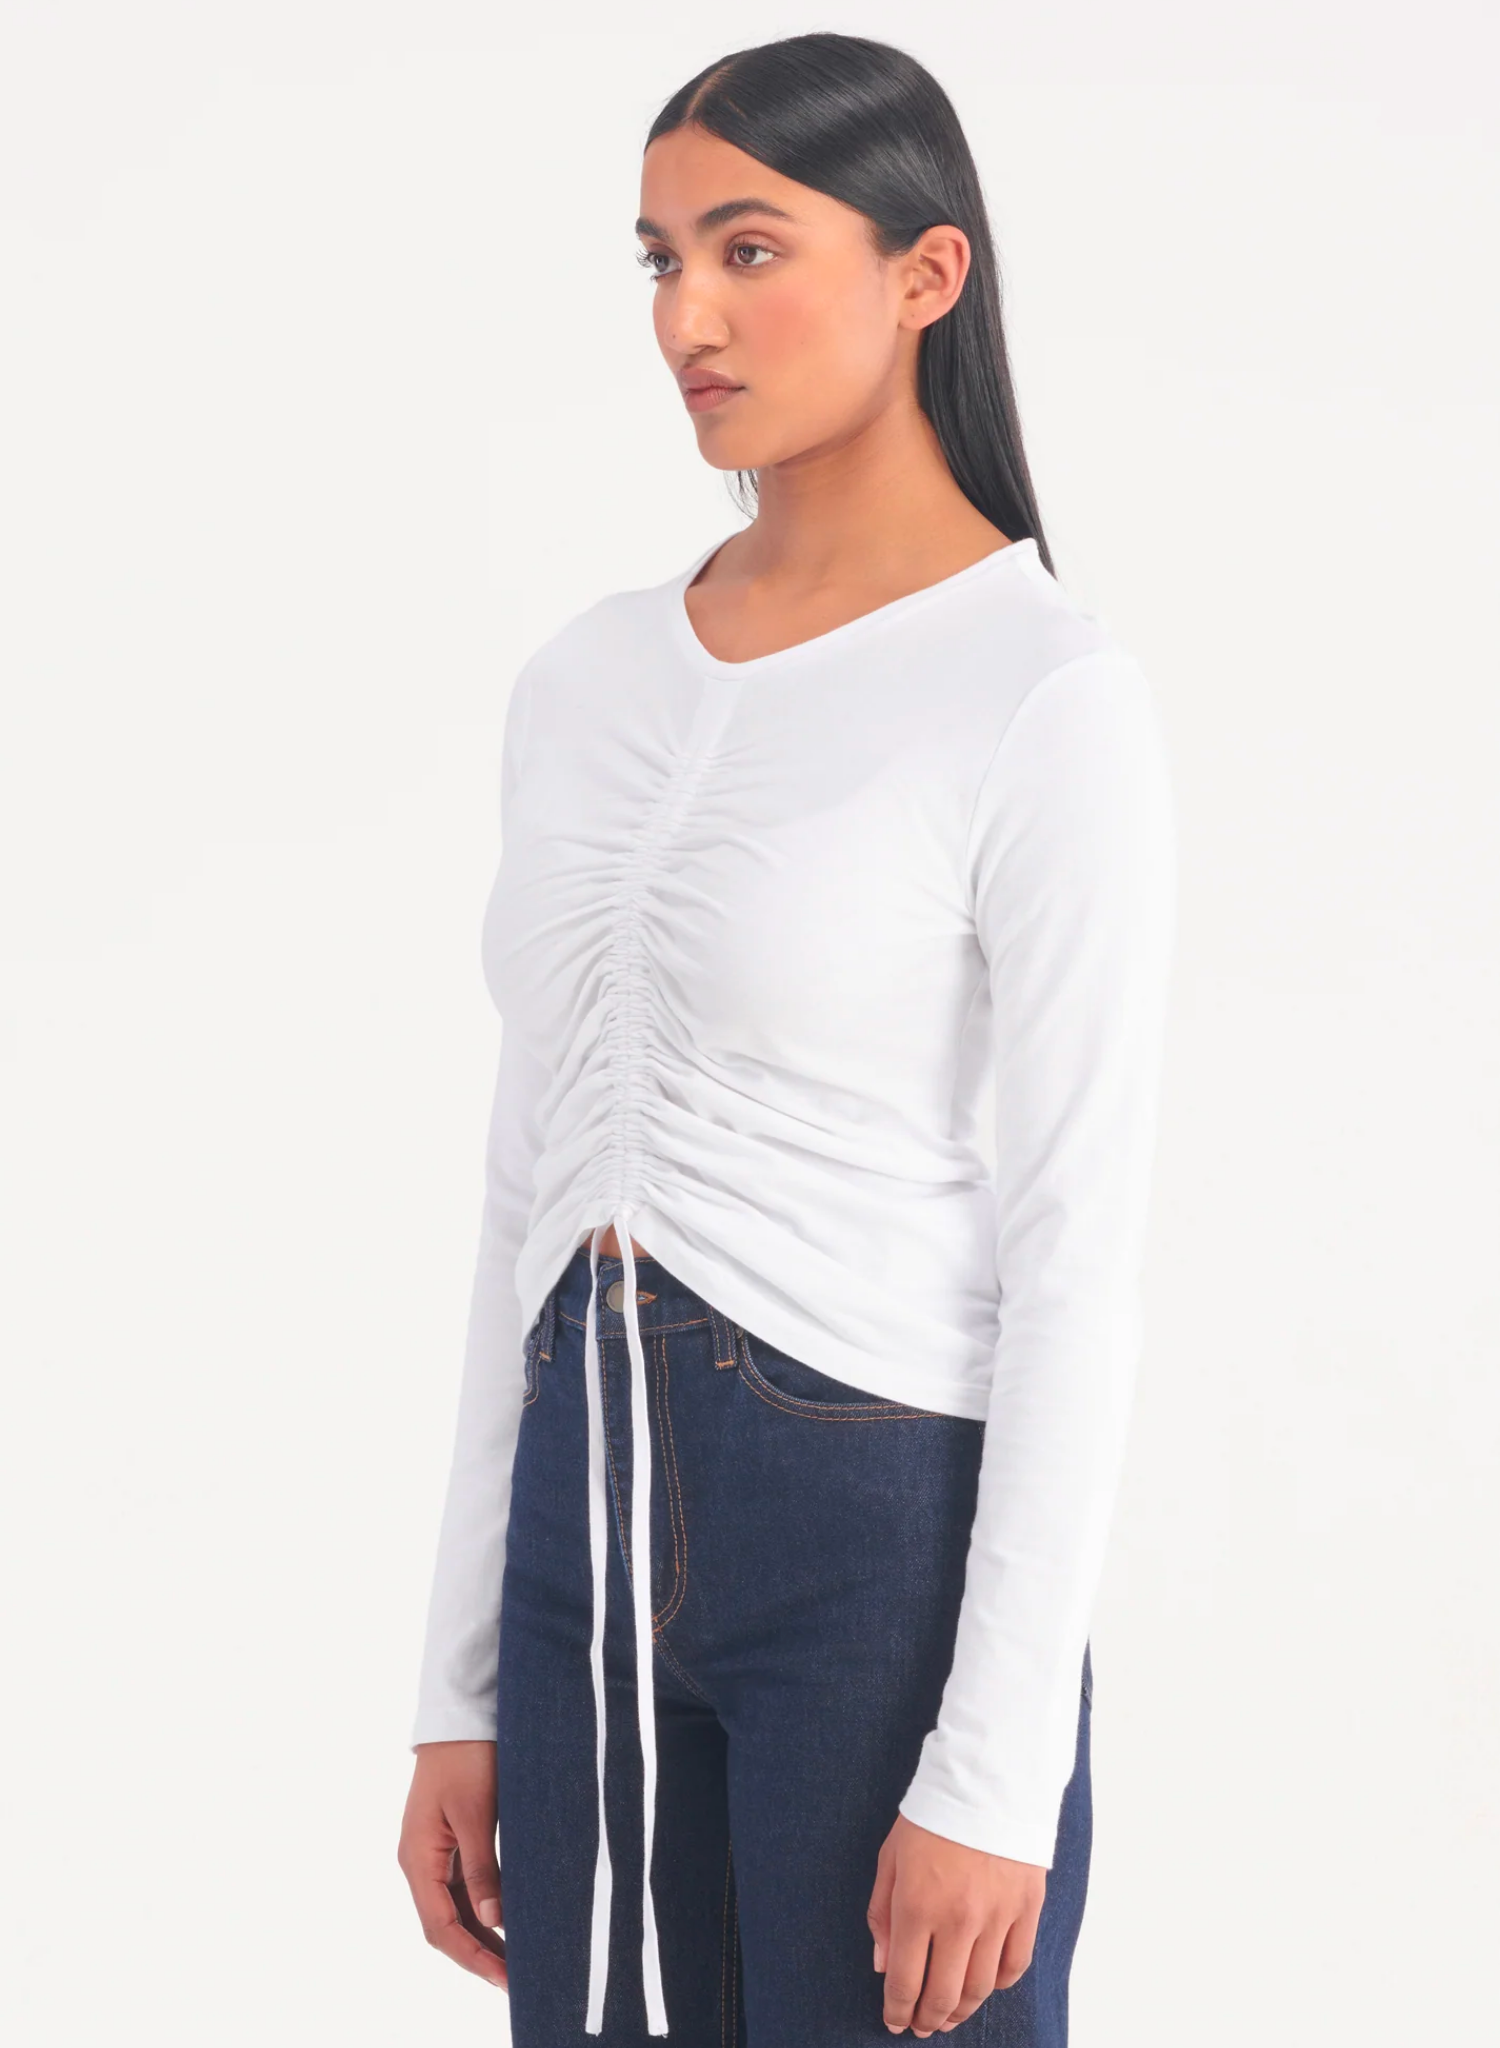 The Lezah Rouched Top features an elasticated drawstring at the centre front for adjustable gathering. The hem can be cinched up for an inverted hemline or relaxed for a straight silhouette. Crafted in lightweight, FibreTrace Good Earth Cotton Jersey, this versatile, long sleeve top is the perfect layering piece for any season.